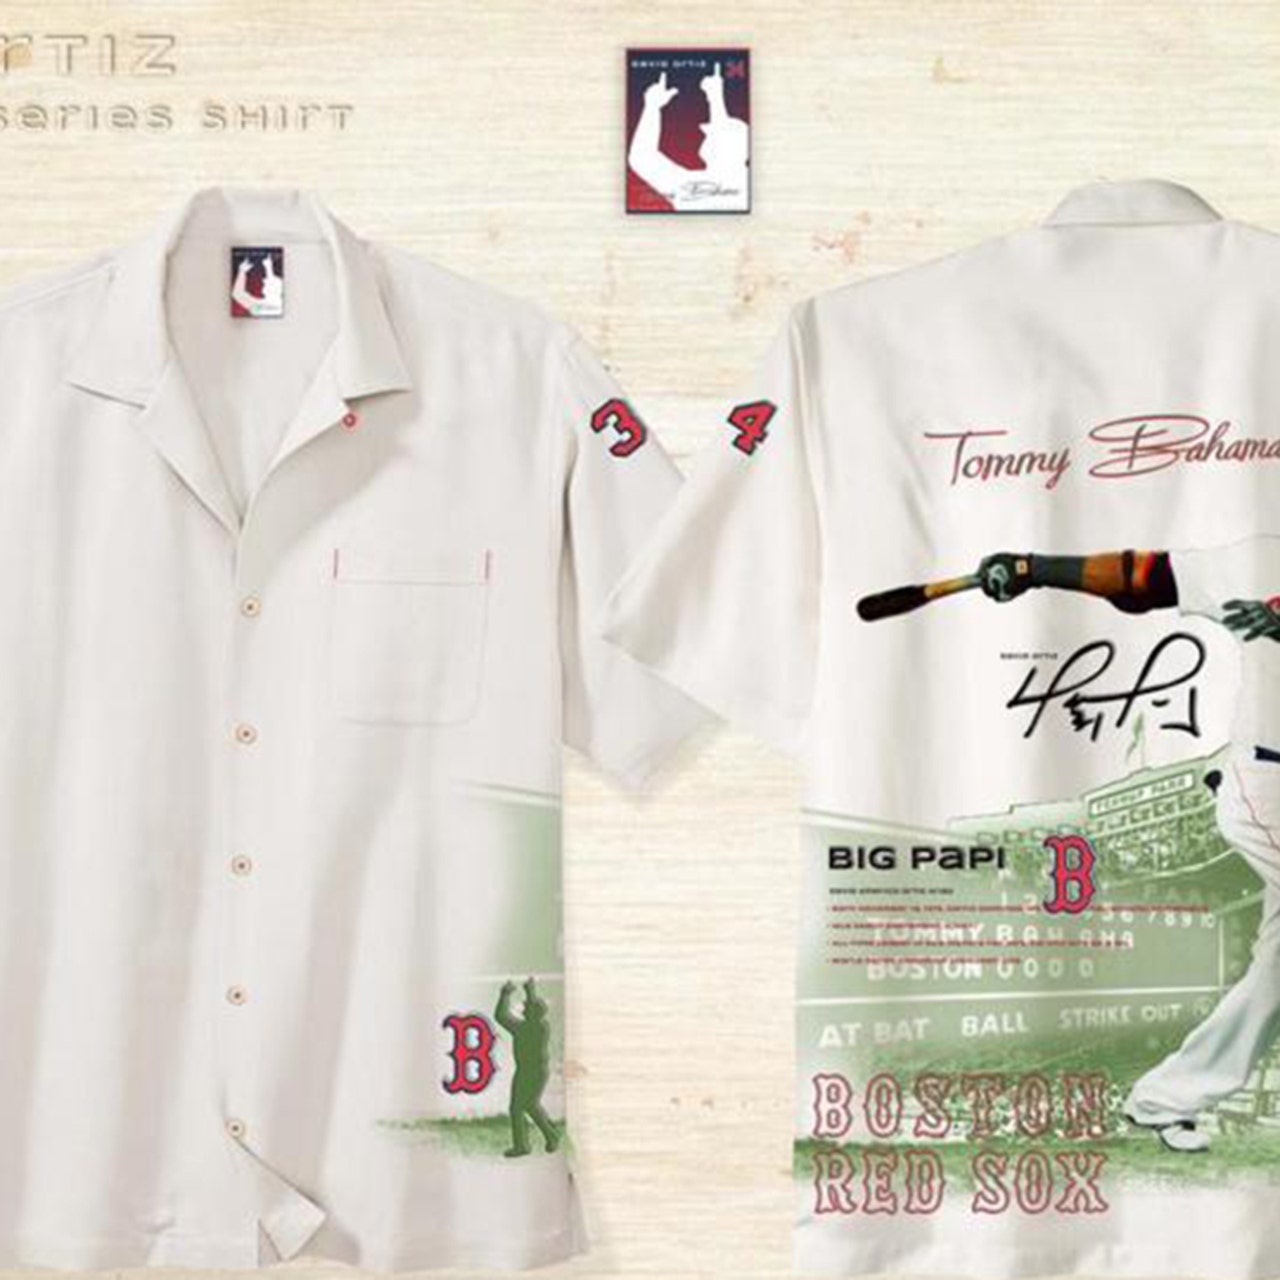 David Ortiz to be immortalized on new Tommy Bahama shirt